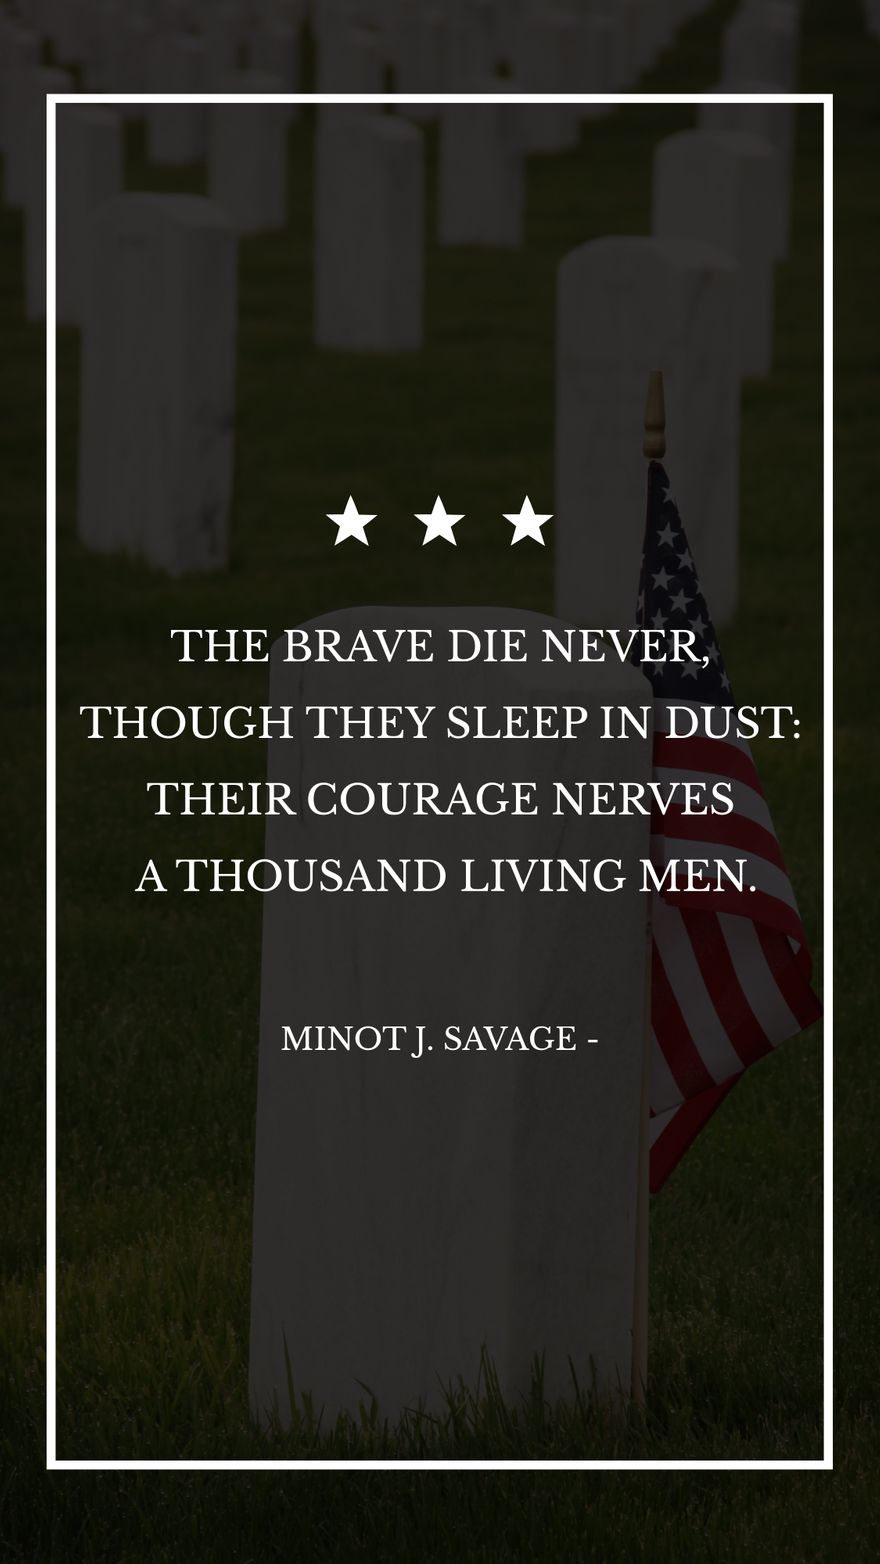 Minot J. Savage - The brave die never, though they sleep in dust: Their courage nerves a thousand living men. in JPG